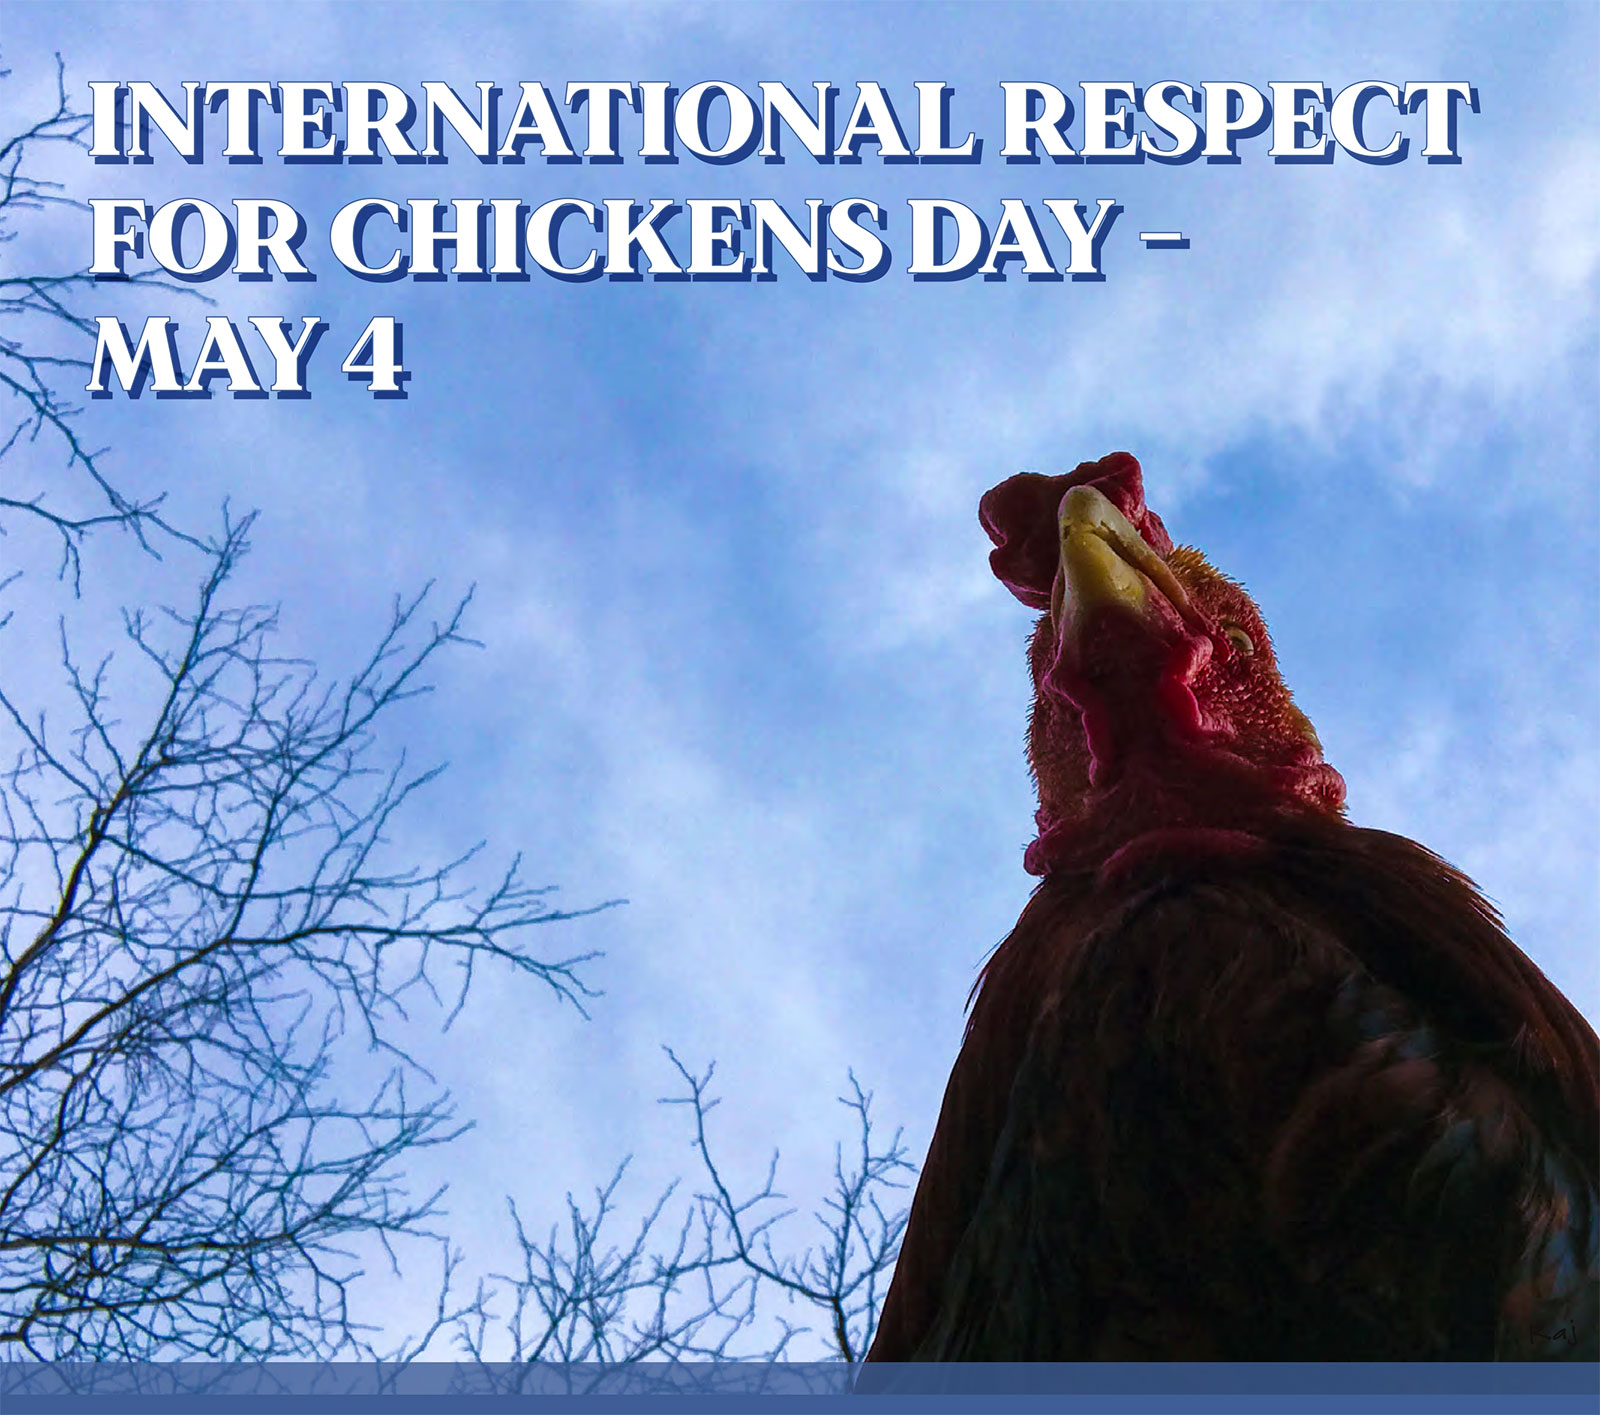 International Respect for Chickens Day - May 4. Photo of Raj the rooster